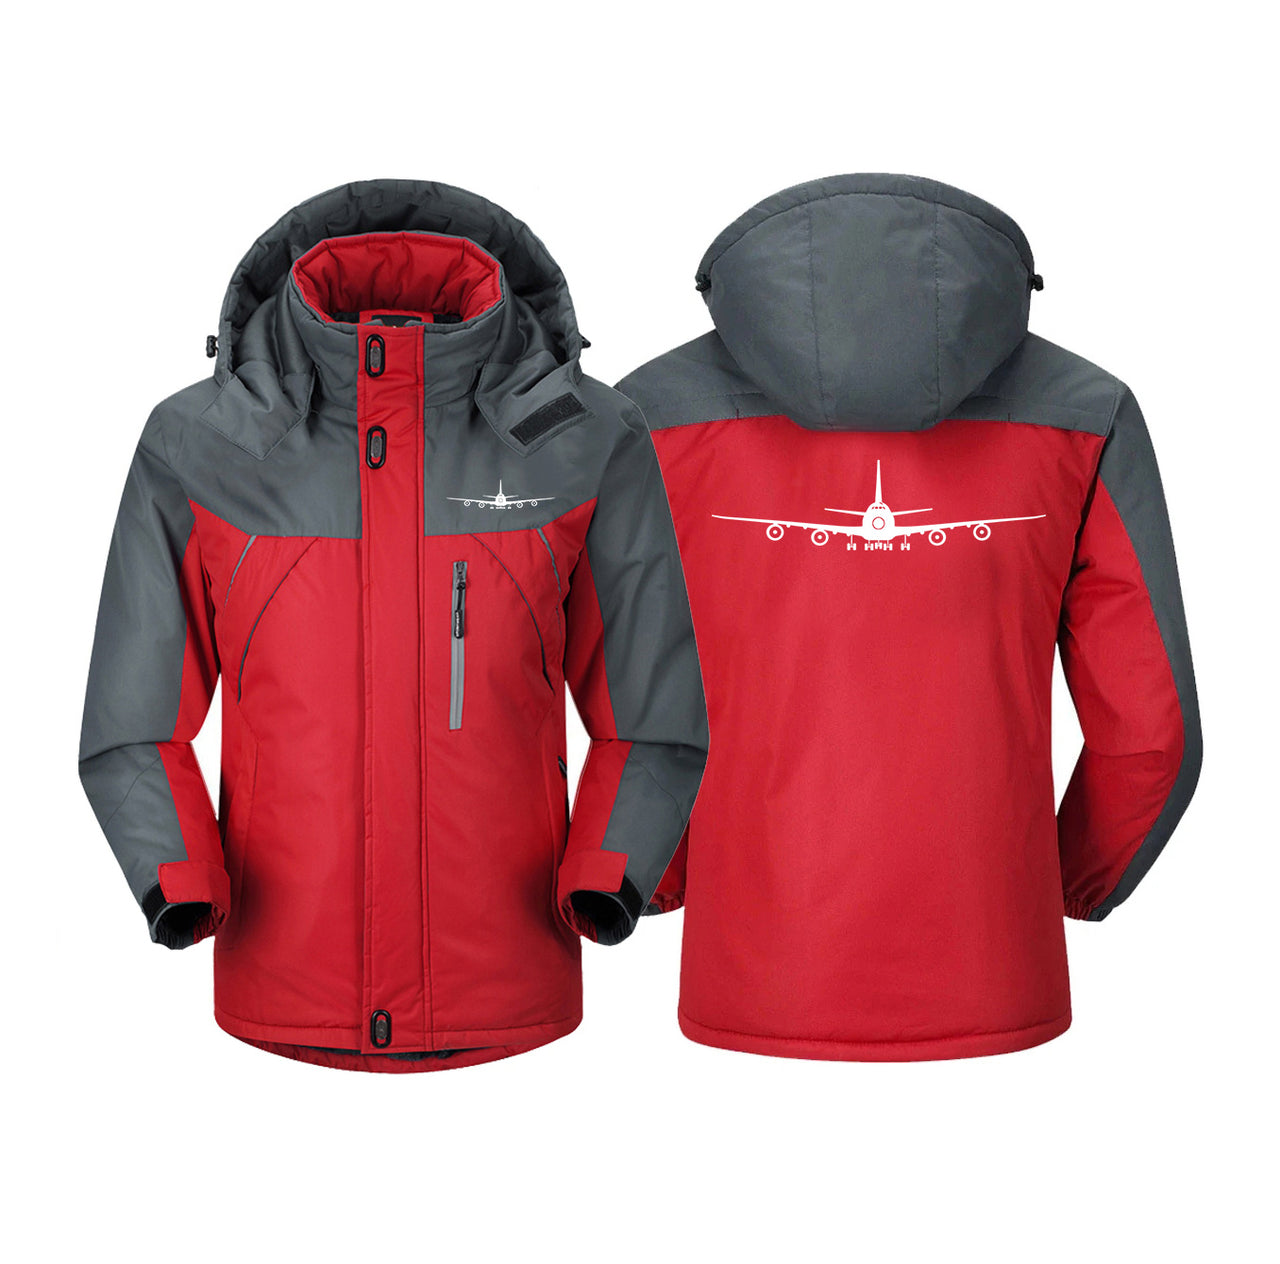 Boeing 747 Silhouette Designed Thick Winter Jackets